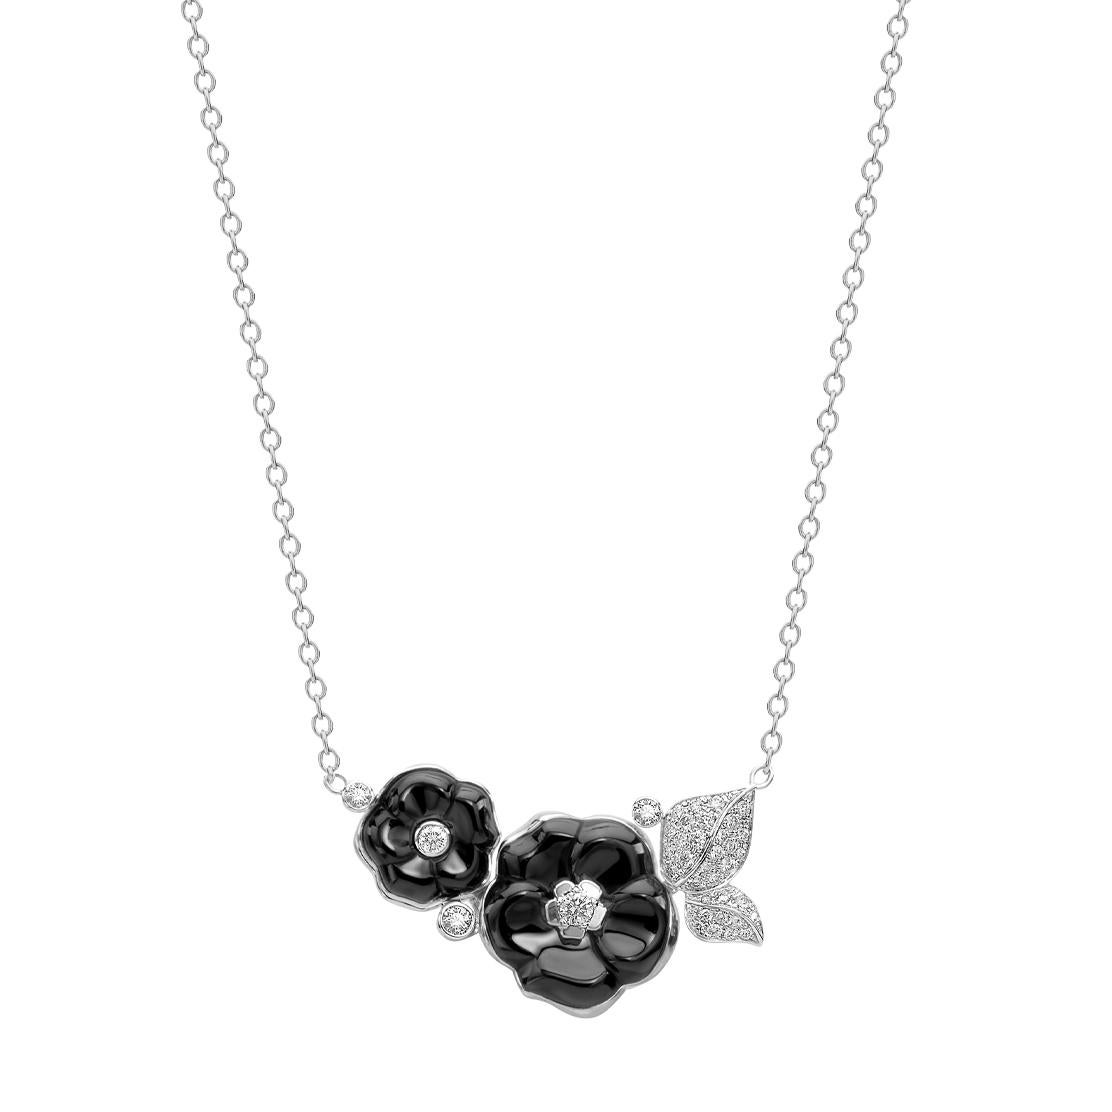 An iconic Chanel necklace from the Camellia collection showcasing 2 carved black ceramic flower motifs adorned with Chanel round brilliant cut diamonds in 18k white gold. The pendant measures 1.45